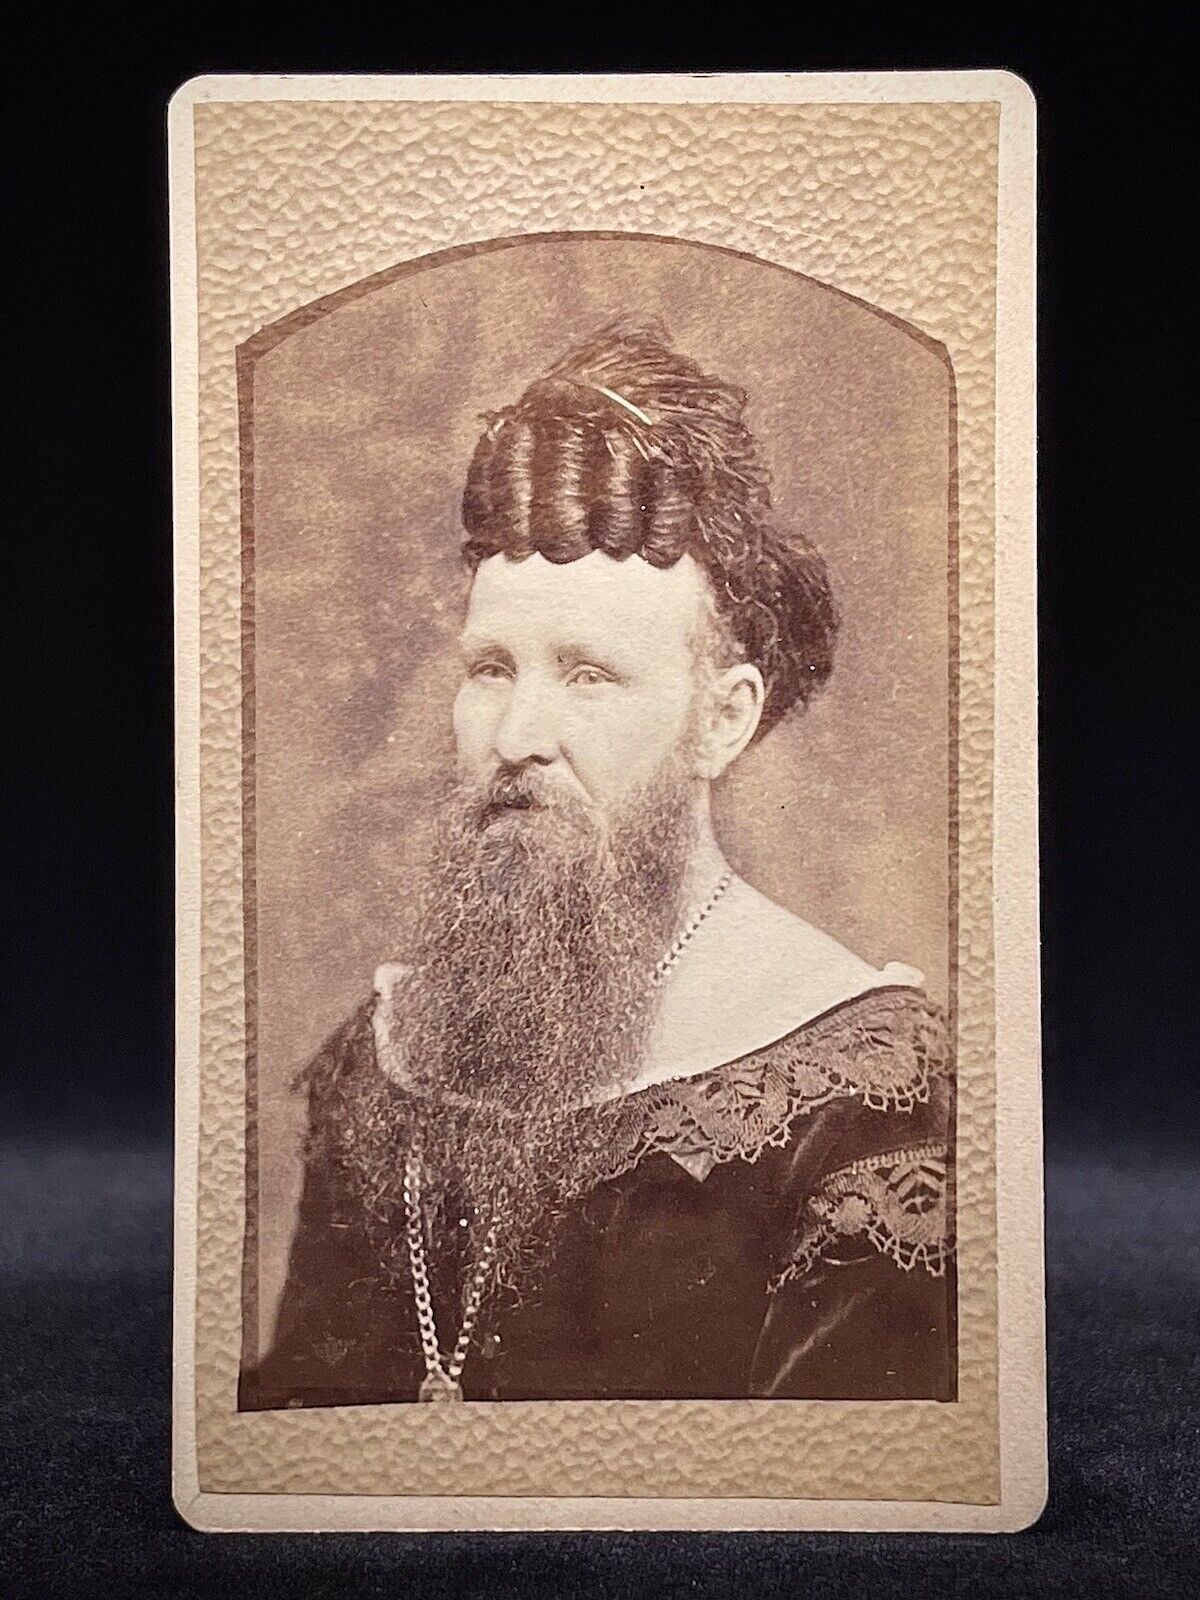 VERY RARE CIRCUS CDV - BEARDED LADY WITH CRAZY HAIR - 19TH C SIDESHOW FREAK